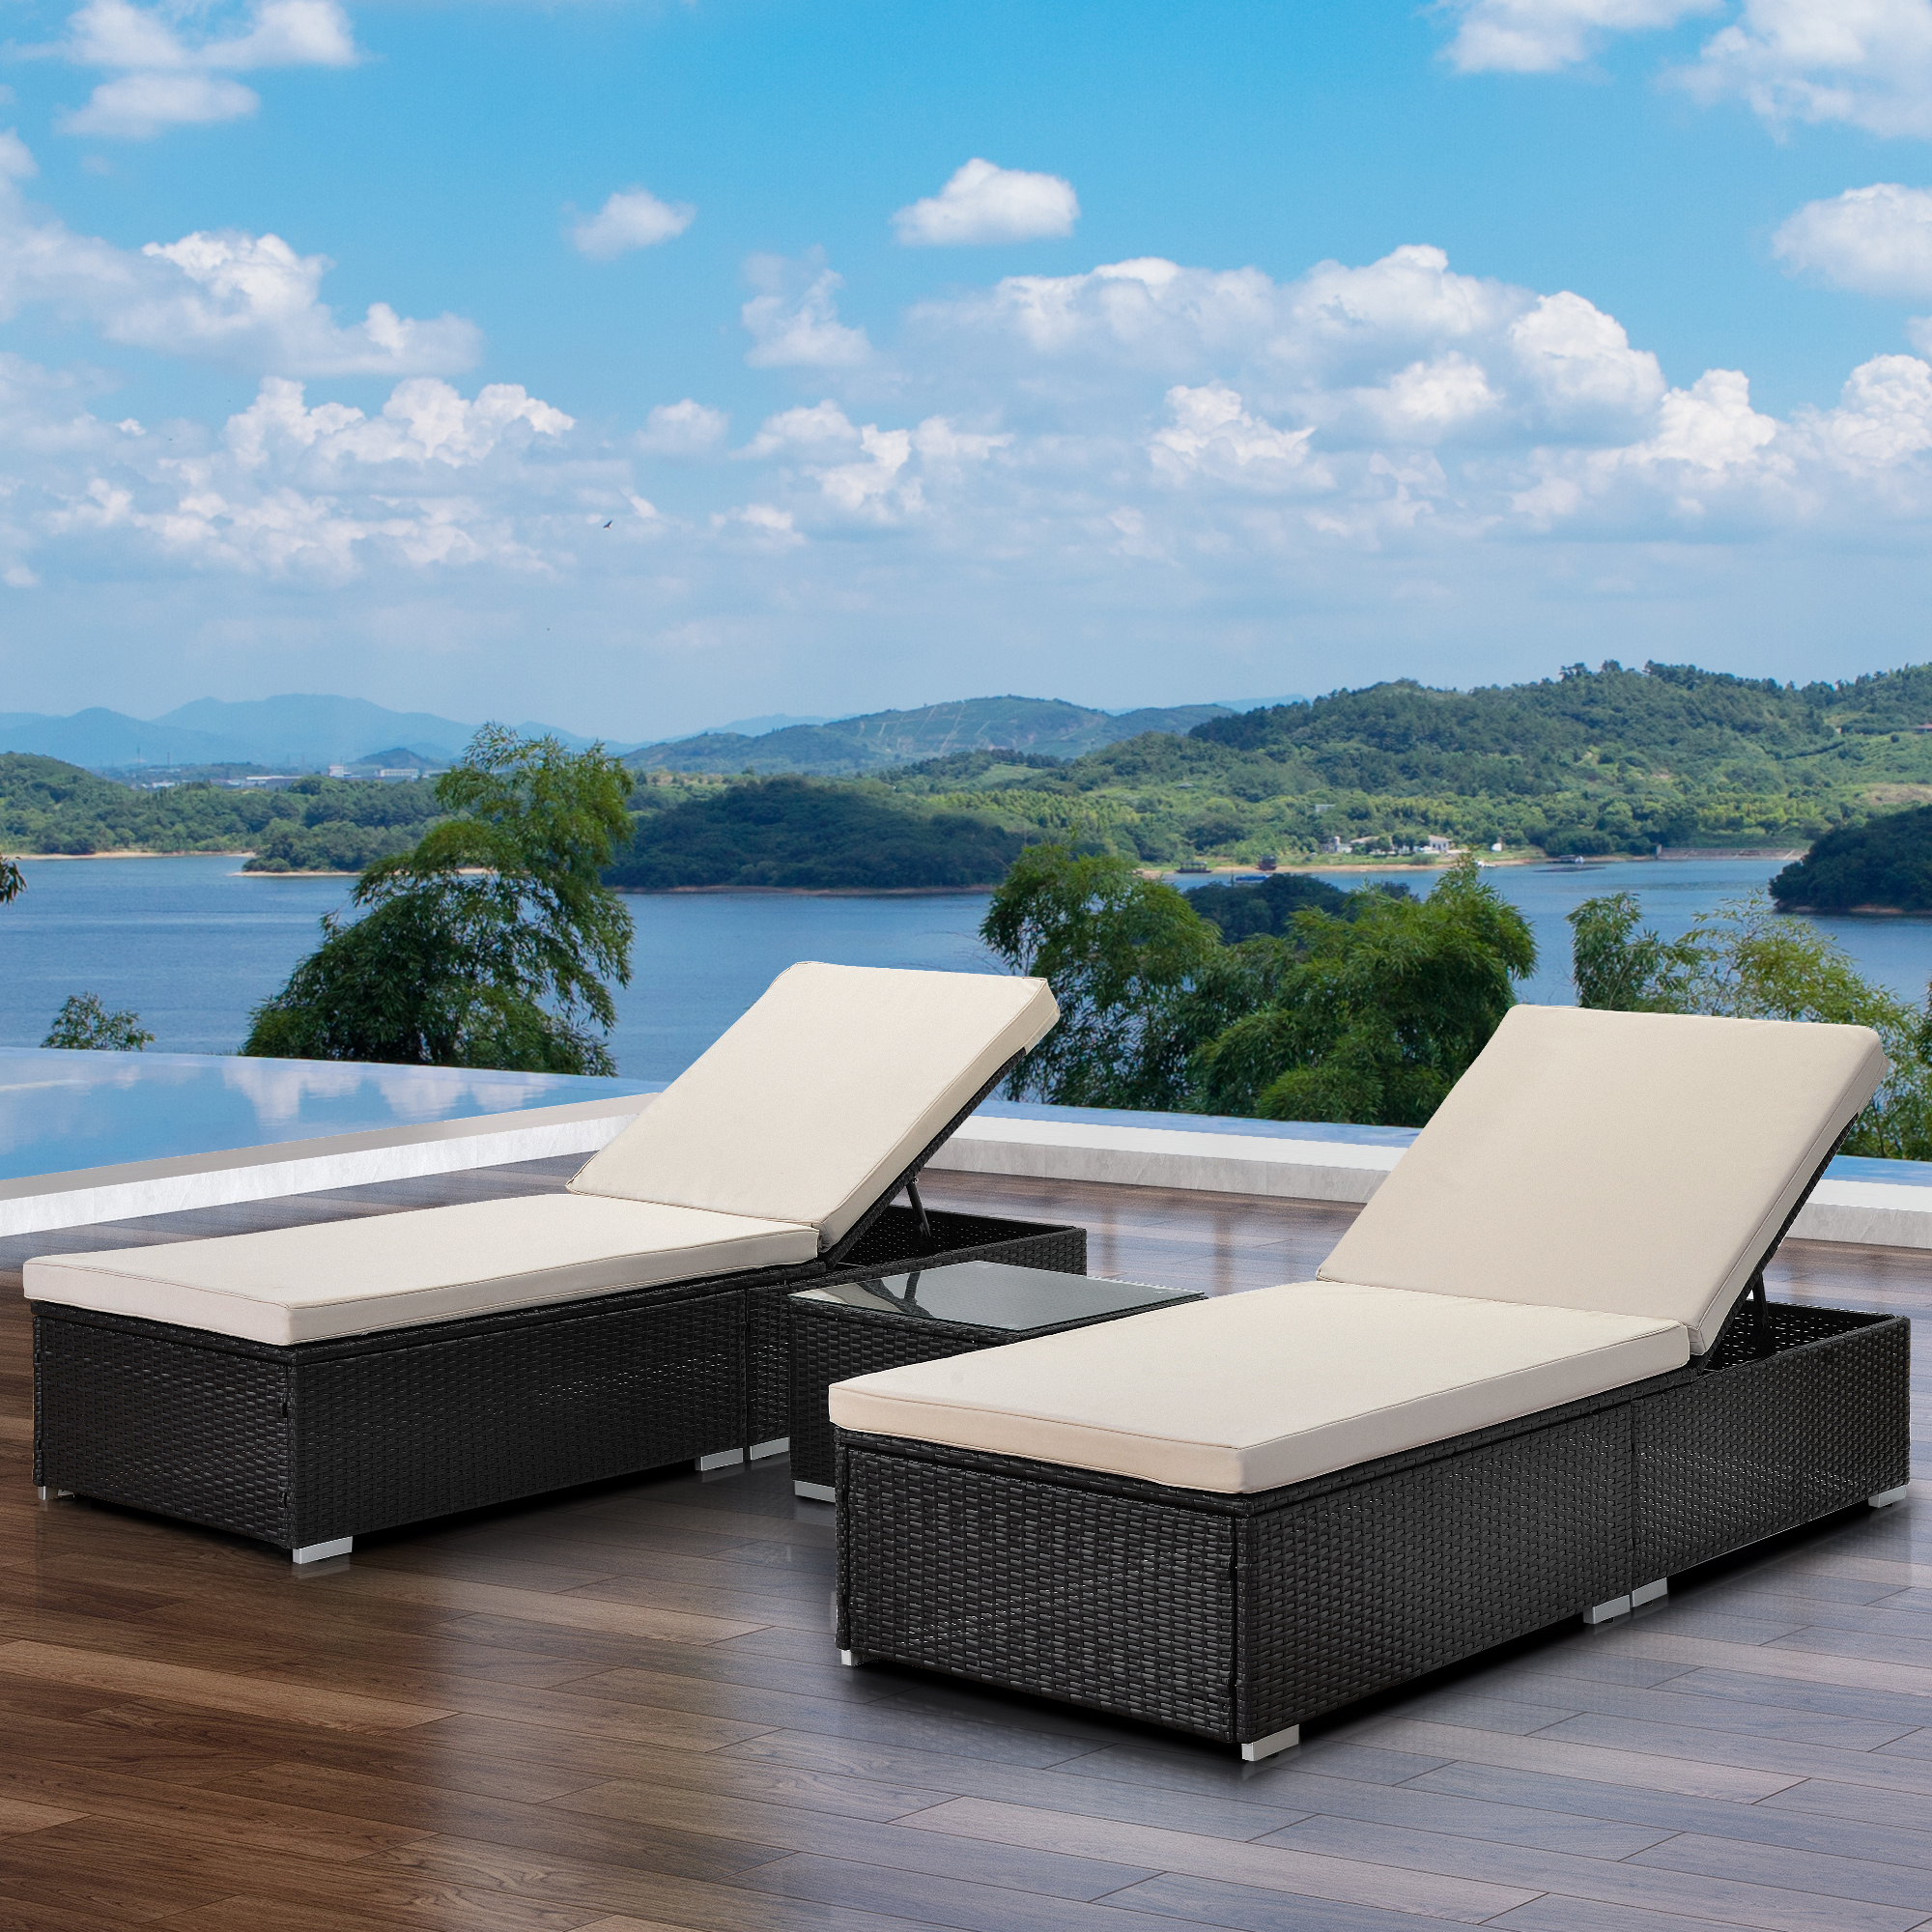 Sportaza Outdoor Garden 3 Piece Patio Lounge Set  Adjustable PE Rattan Reclining Chairs with Cushions and Side Table. - image 4 of 8